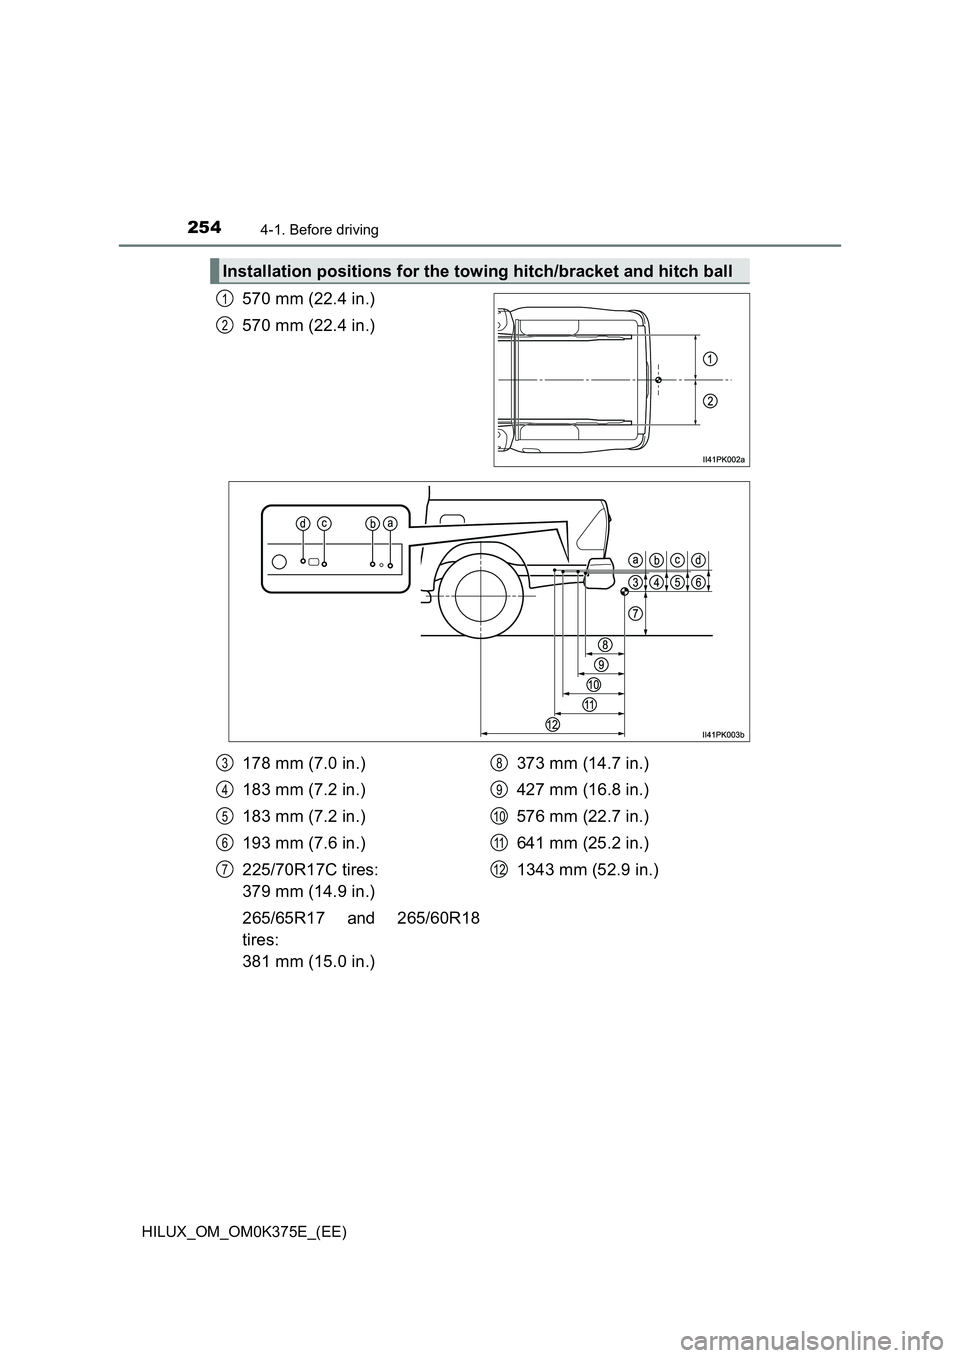 TOYOTA HILUX 2019  Owners Manual 2544-1. Before driving
HILUX_OM_OM0K375E_(EE)
570 mm (22.4 in.) 
570 mm (22.4 in.)
Installation positions for the towing hitch/bracket and hitch ball
1
2
178 mm (7.0 in.)
183 mm (7.2 in.) 
183 mm (7.2